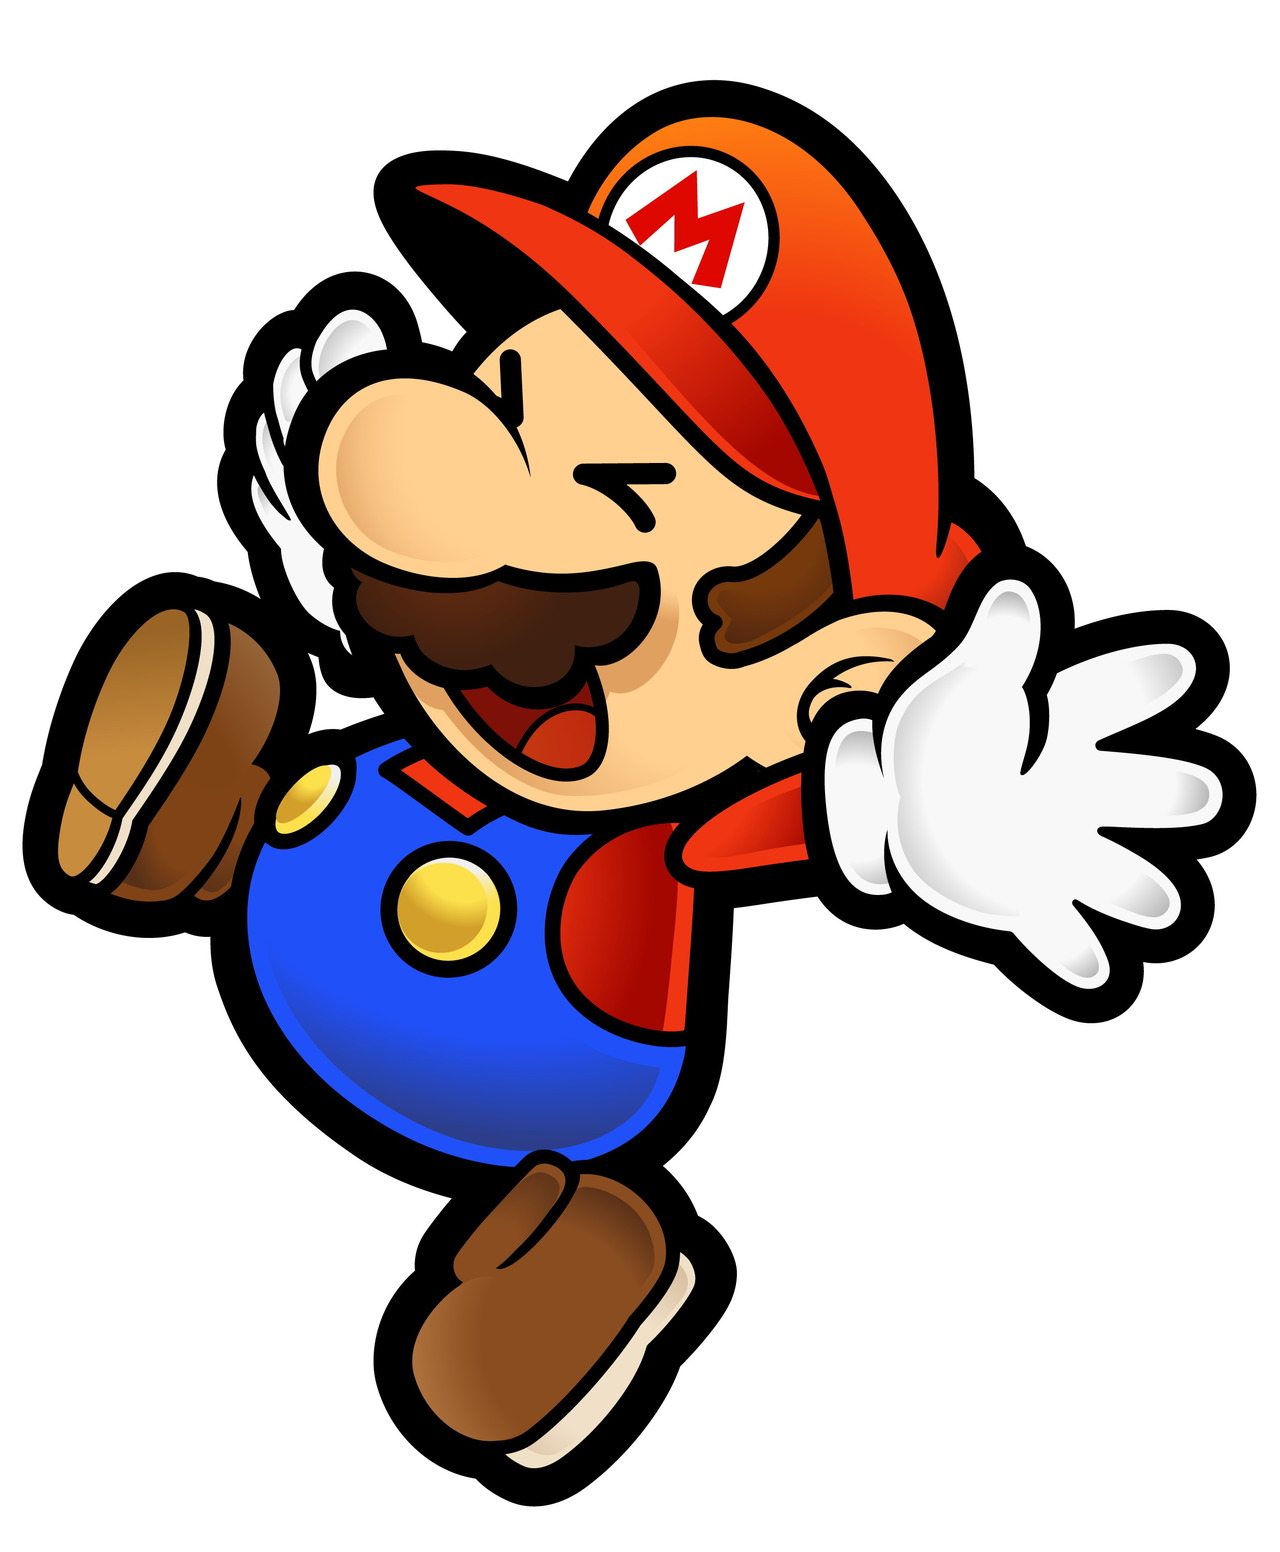 paper-mario-wallpapers-video-game-hq-paper-mario-pictures-4k-wallpapers-2019